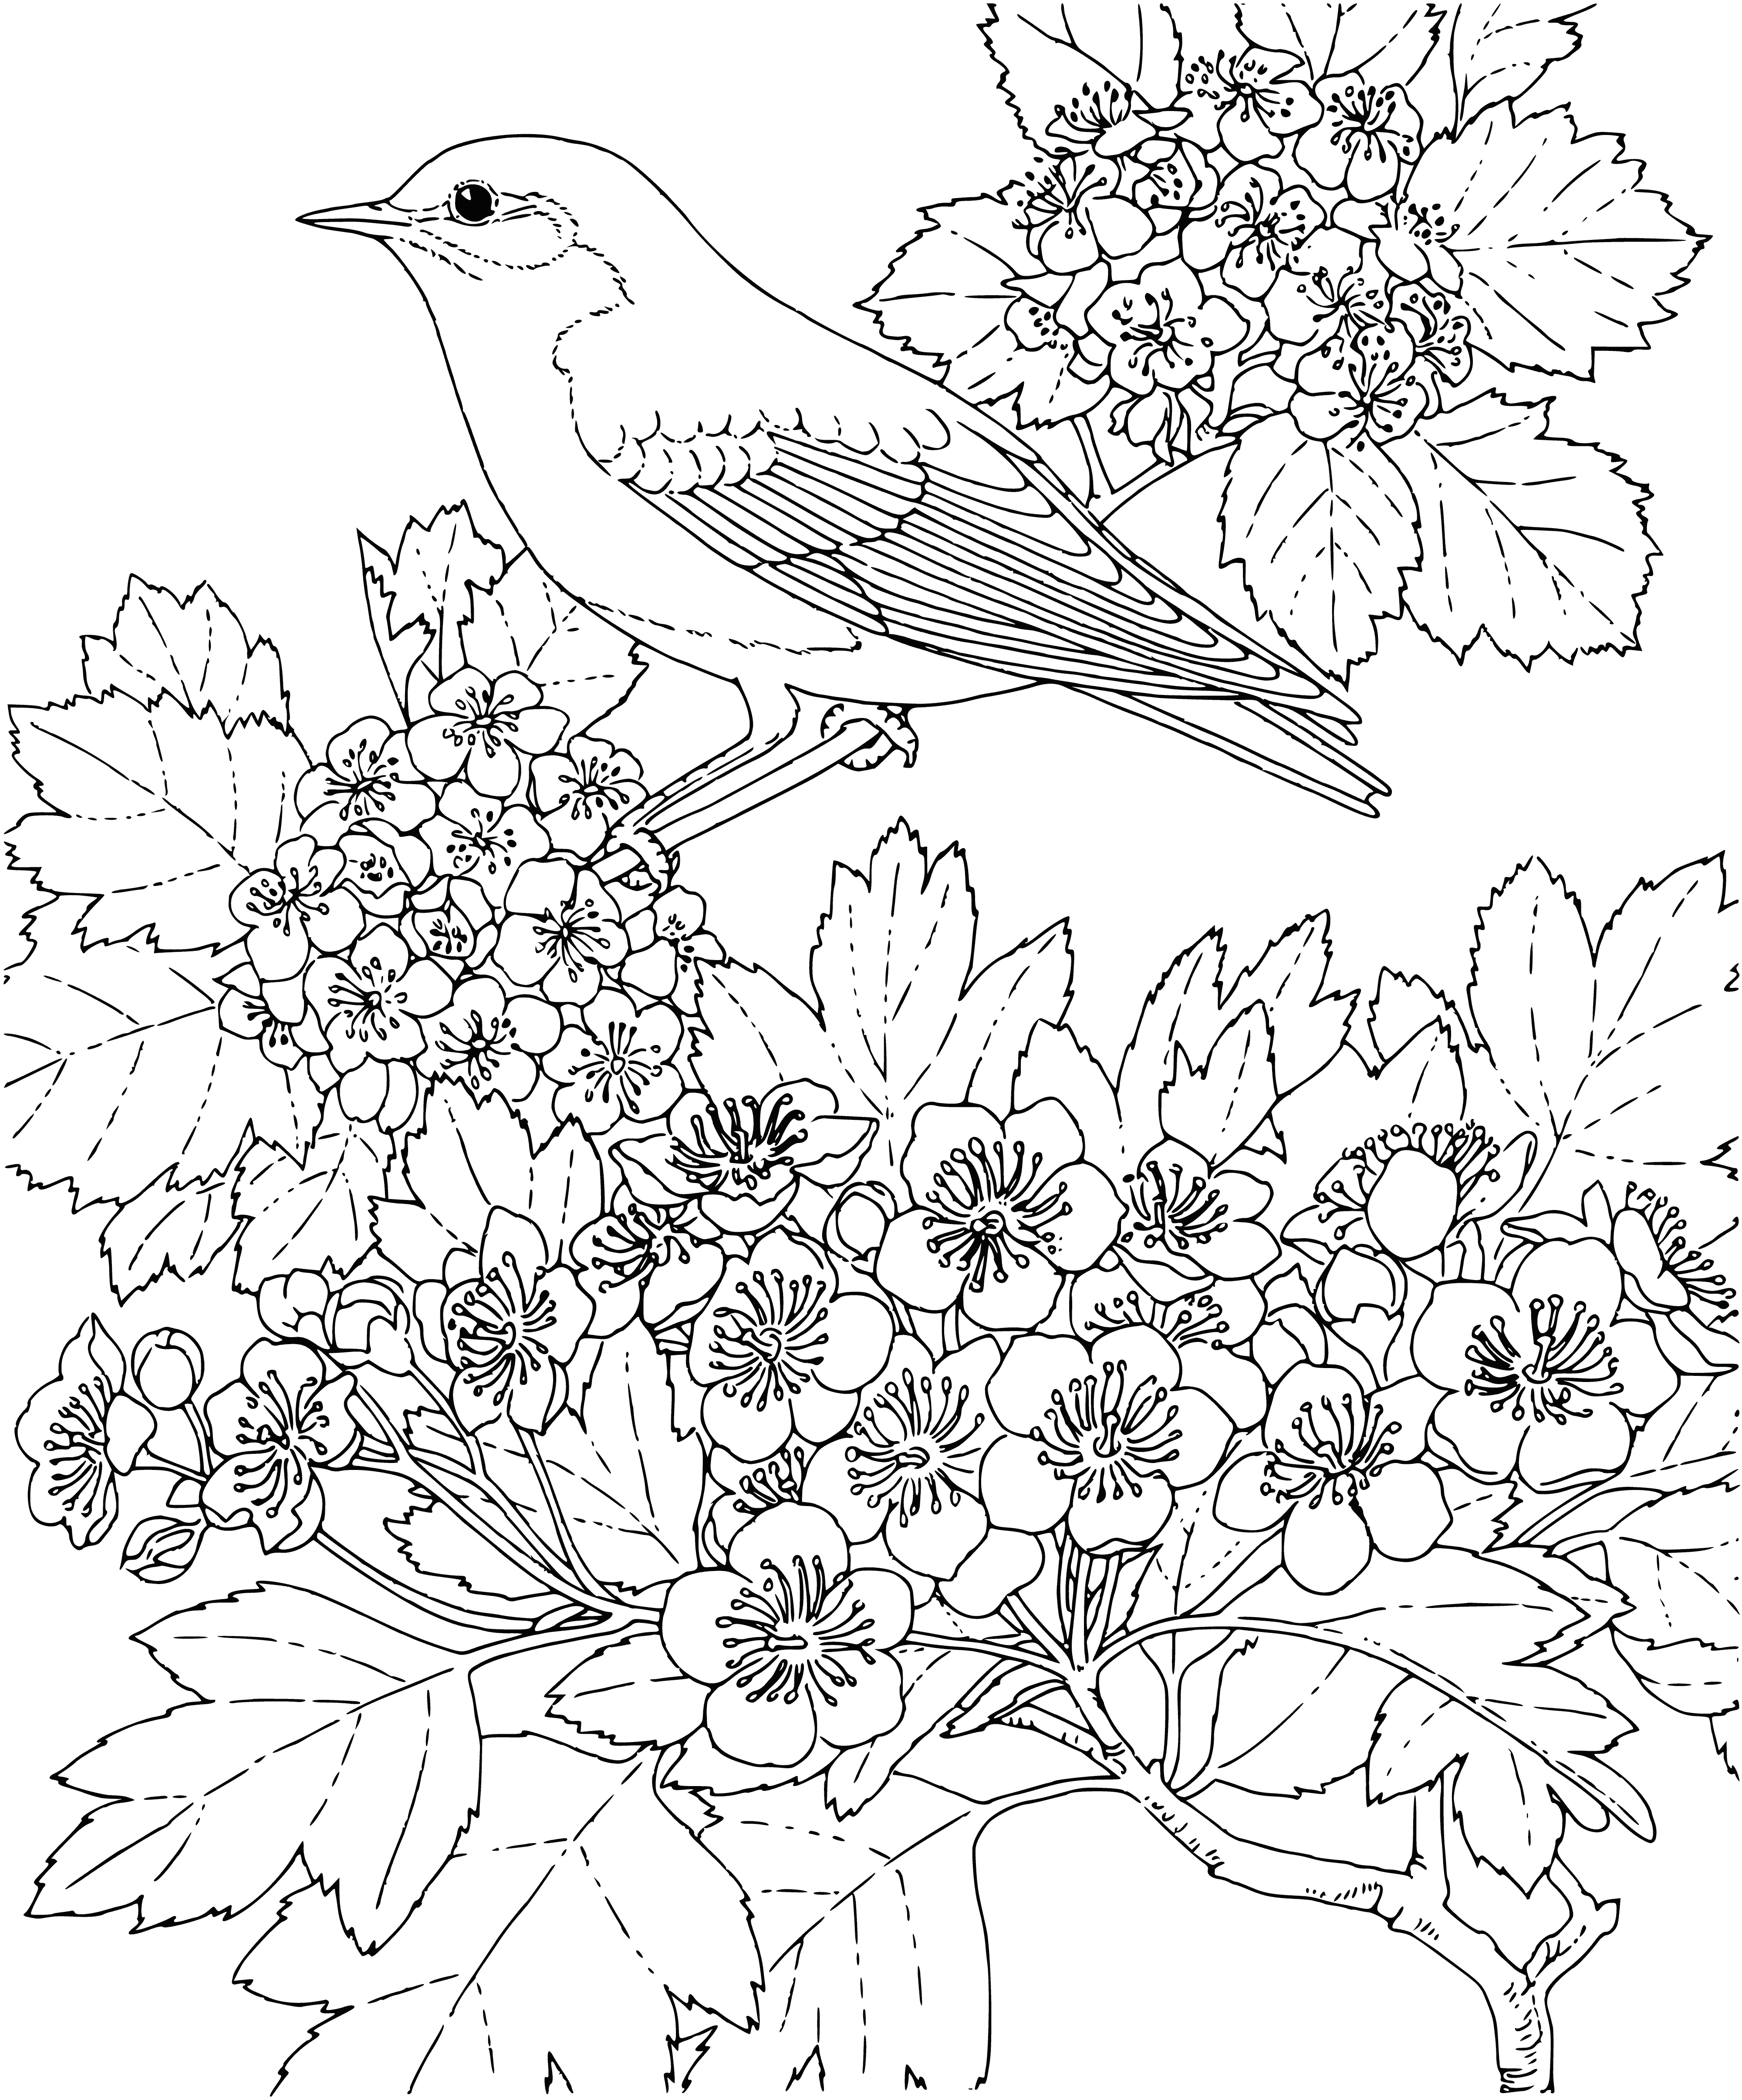 coloring page: Small bird w/ long beak, brown body & white stomach perched on branch; black eyes.